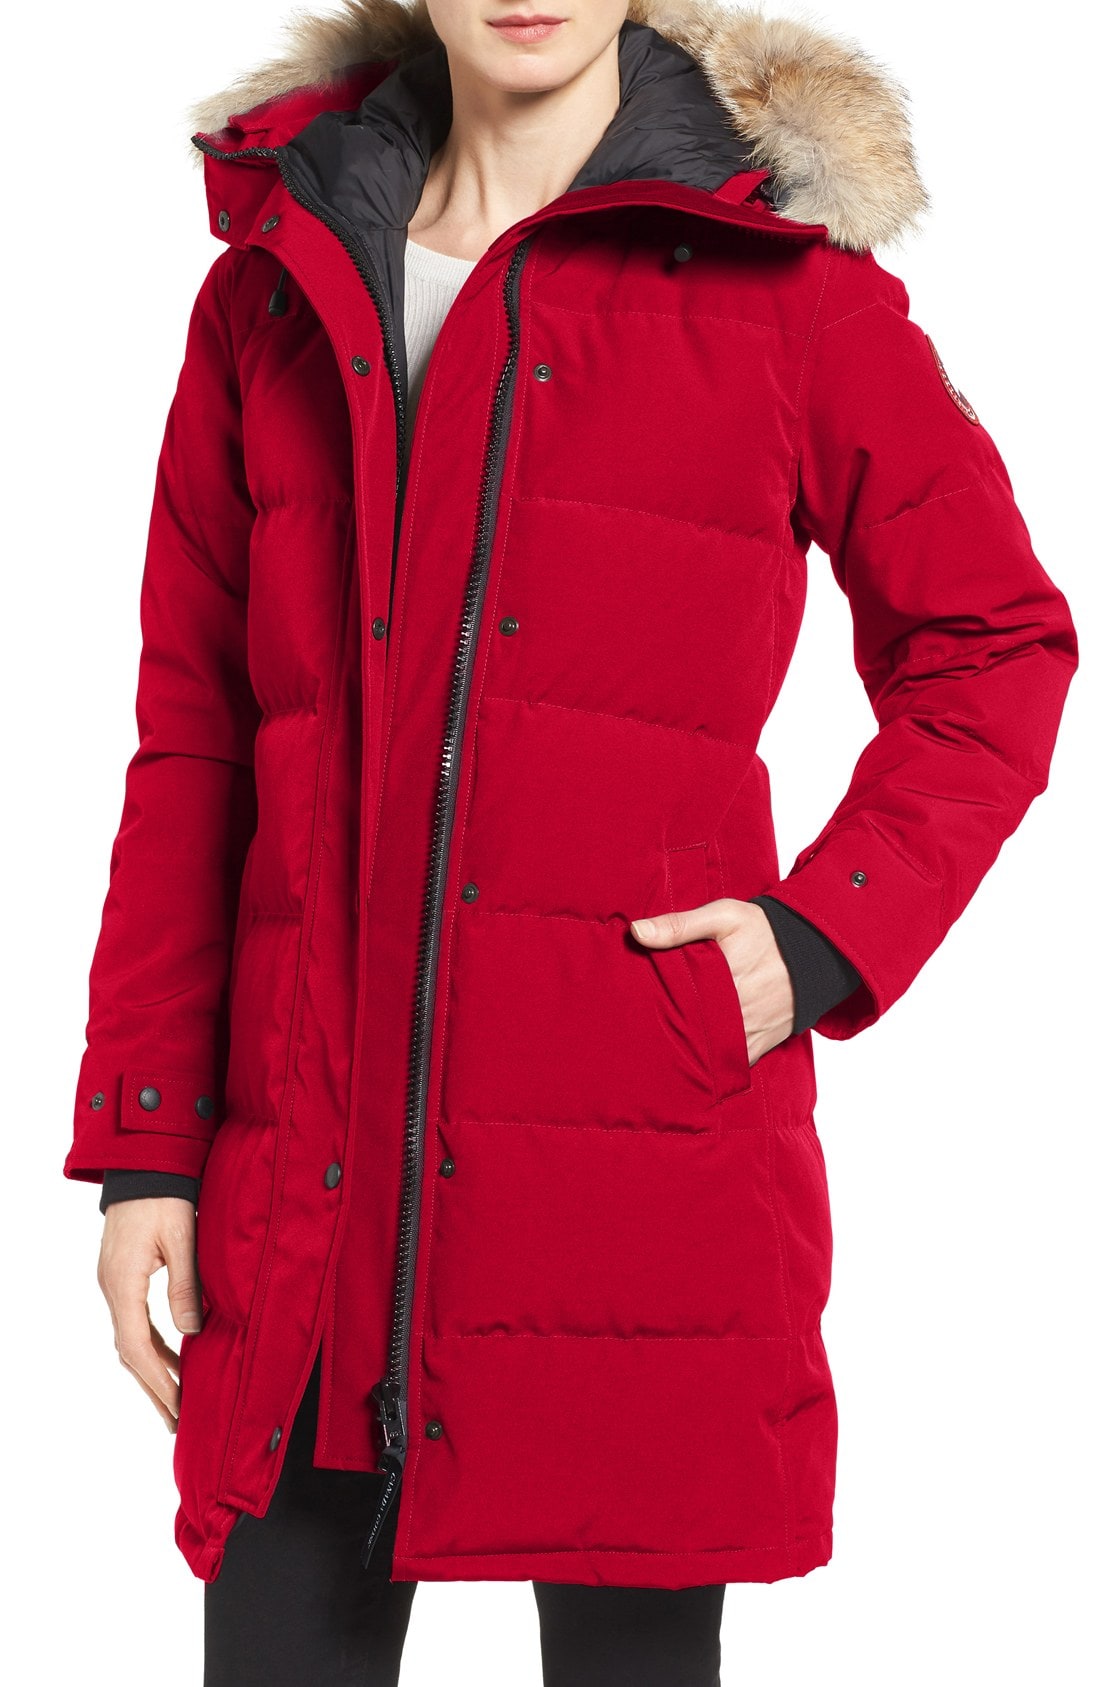 RED PARKAS – A good choice for fashionistas